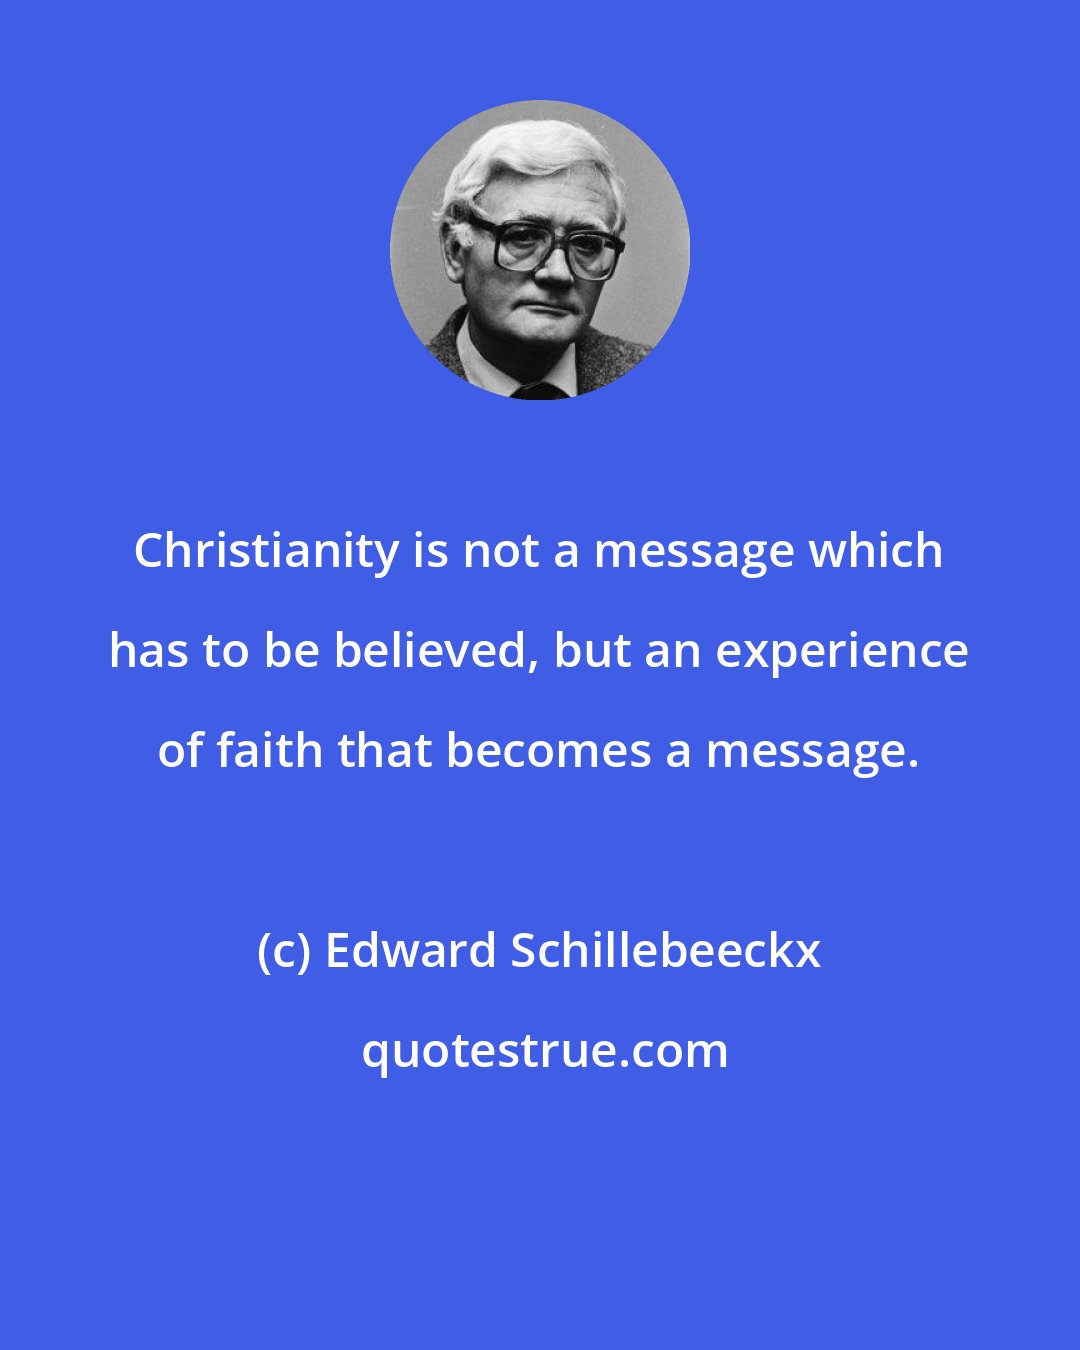 Edward Schillebeeckx: Christianity is not a message which has to be believed, but an experience of faith that becomes a message.